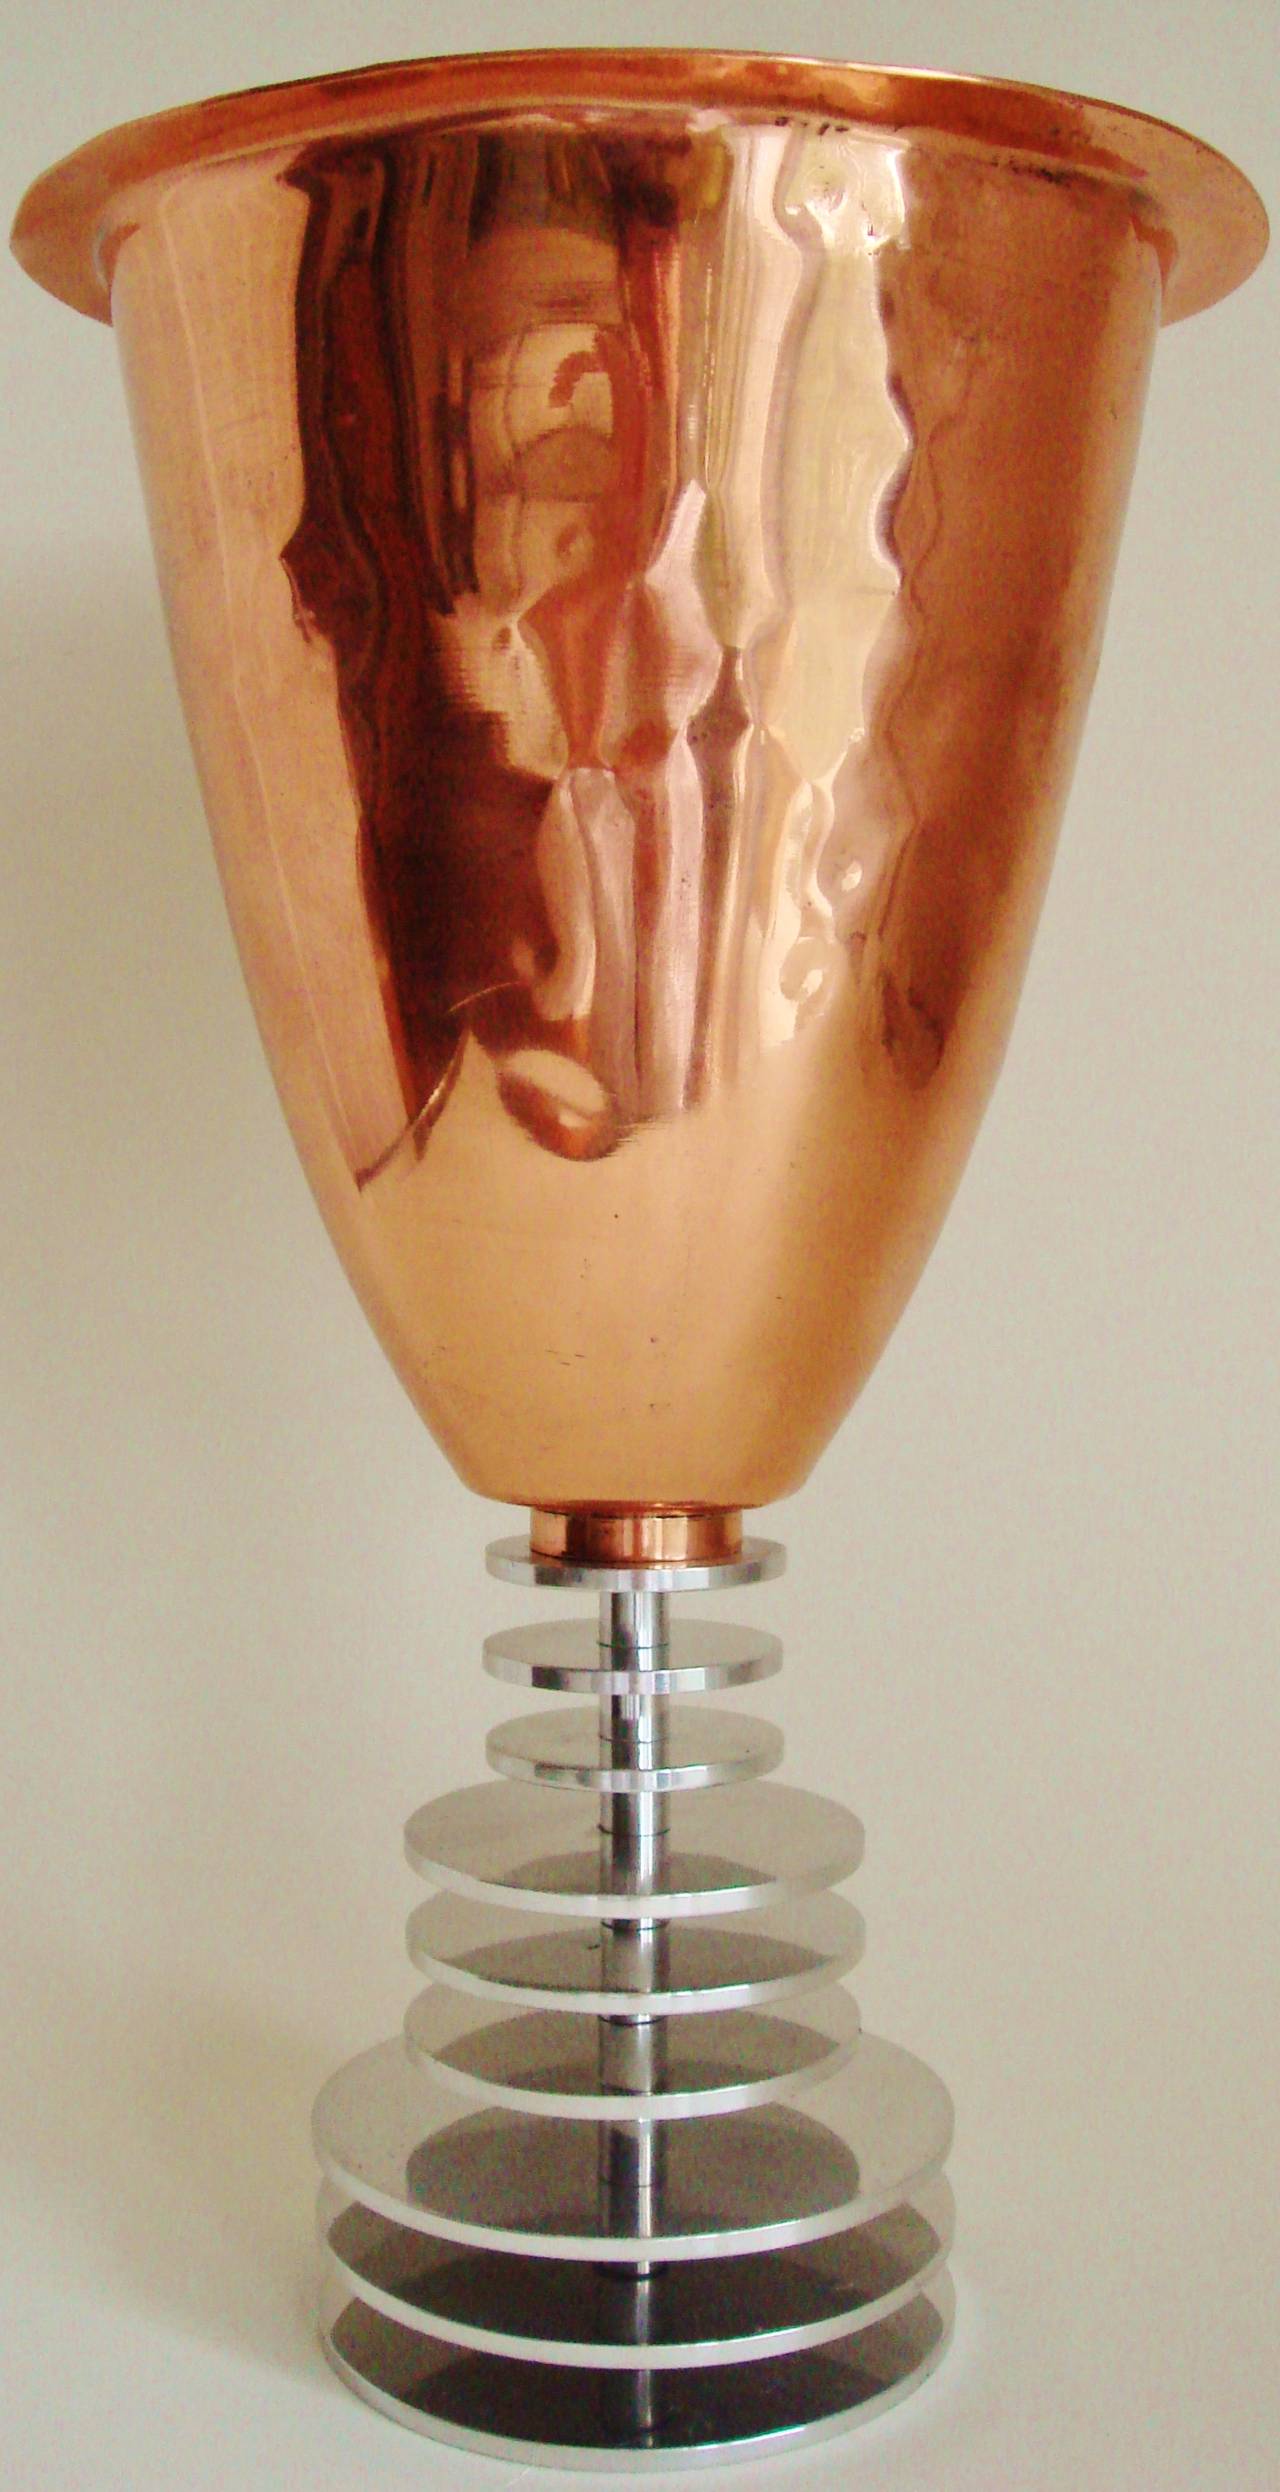 Produced in limited numbers during the late 1980s, English designer, Keith Gibbons crafted this stunning and distinctive vase. The vase along with a companion bowl and dish  each used the contrast of the spun copper with the tiered aluminium disc